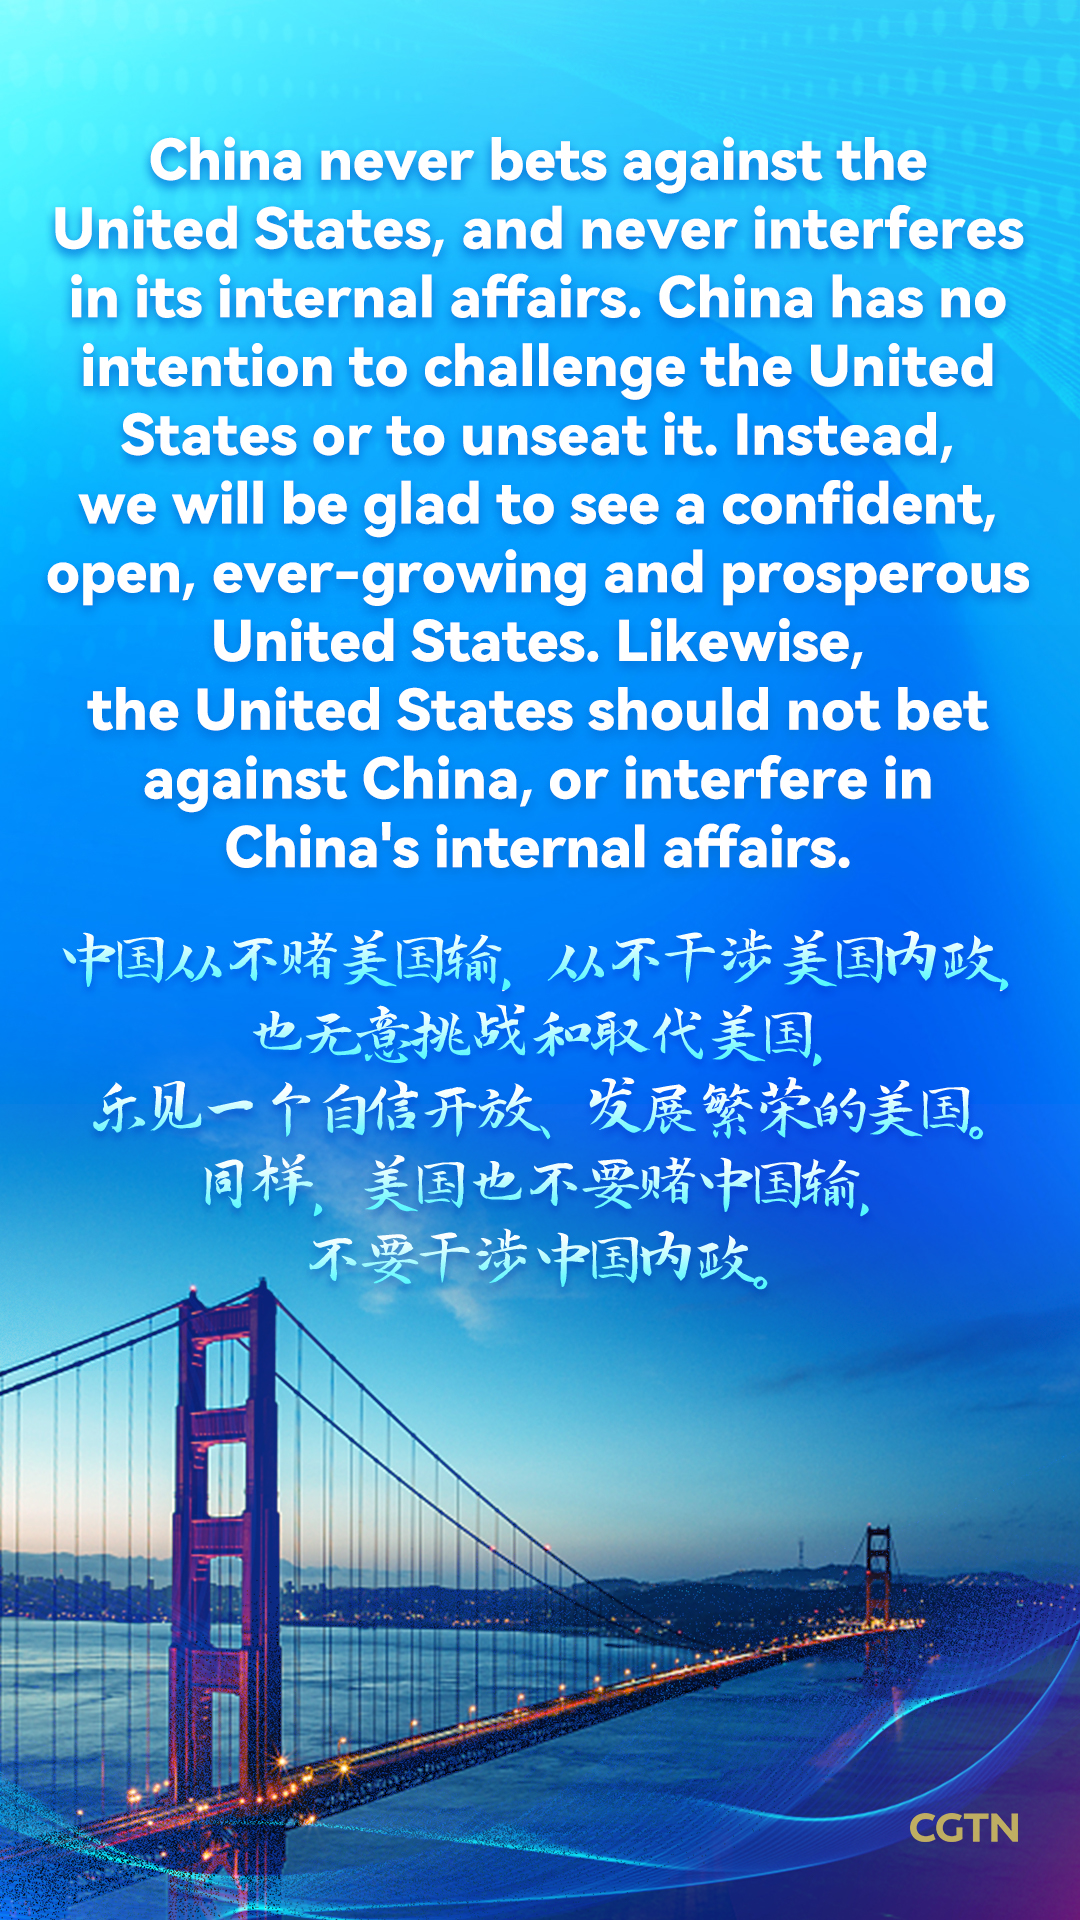 Xi Jinping's key quotes at the welcome dinner in U.S.